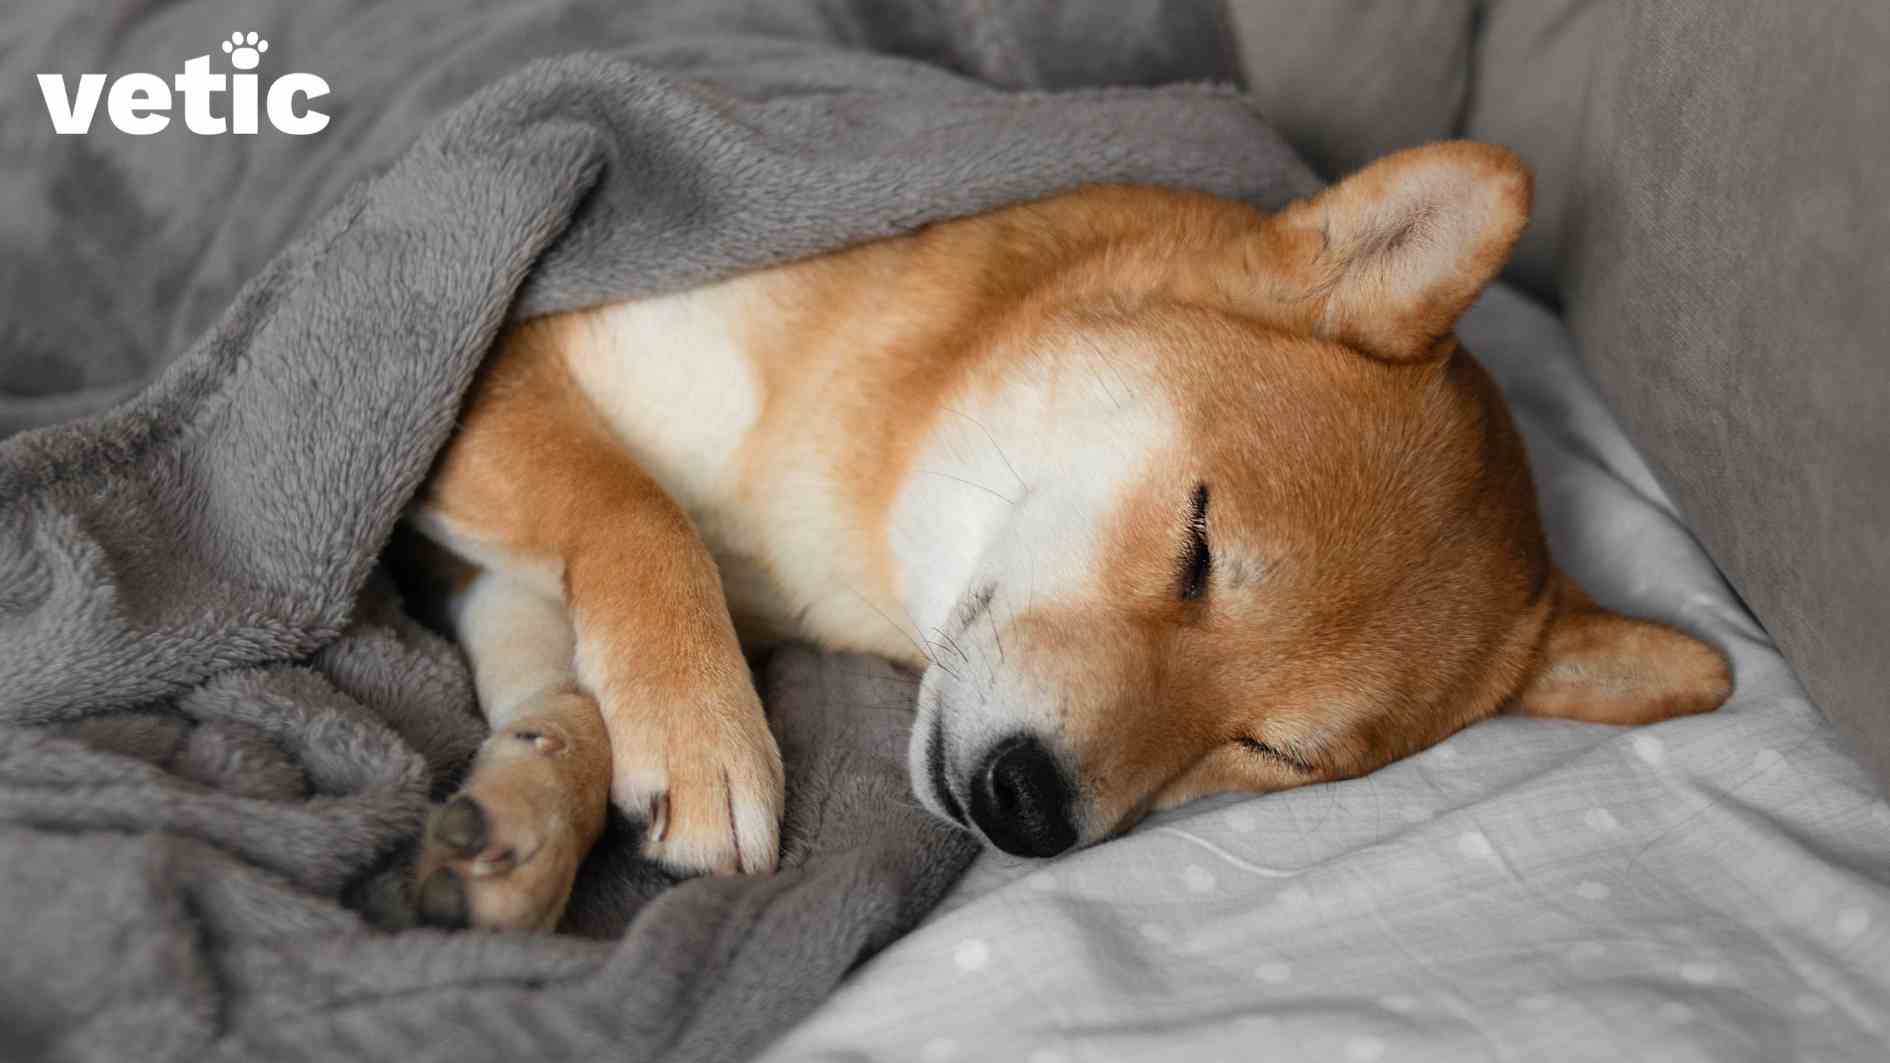 Shiba Inu dog sleeping comfortably on the bed with a grey cover and matching duvet cover. He is wrapped in a grey blanket. Only his Head and front paws are sticking out of the blanket. To keep your dog calm provide them with a cosy nook that makes them feel safe.